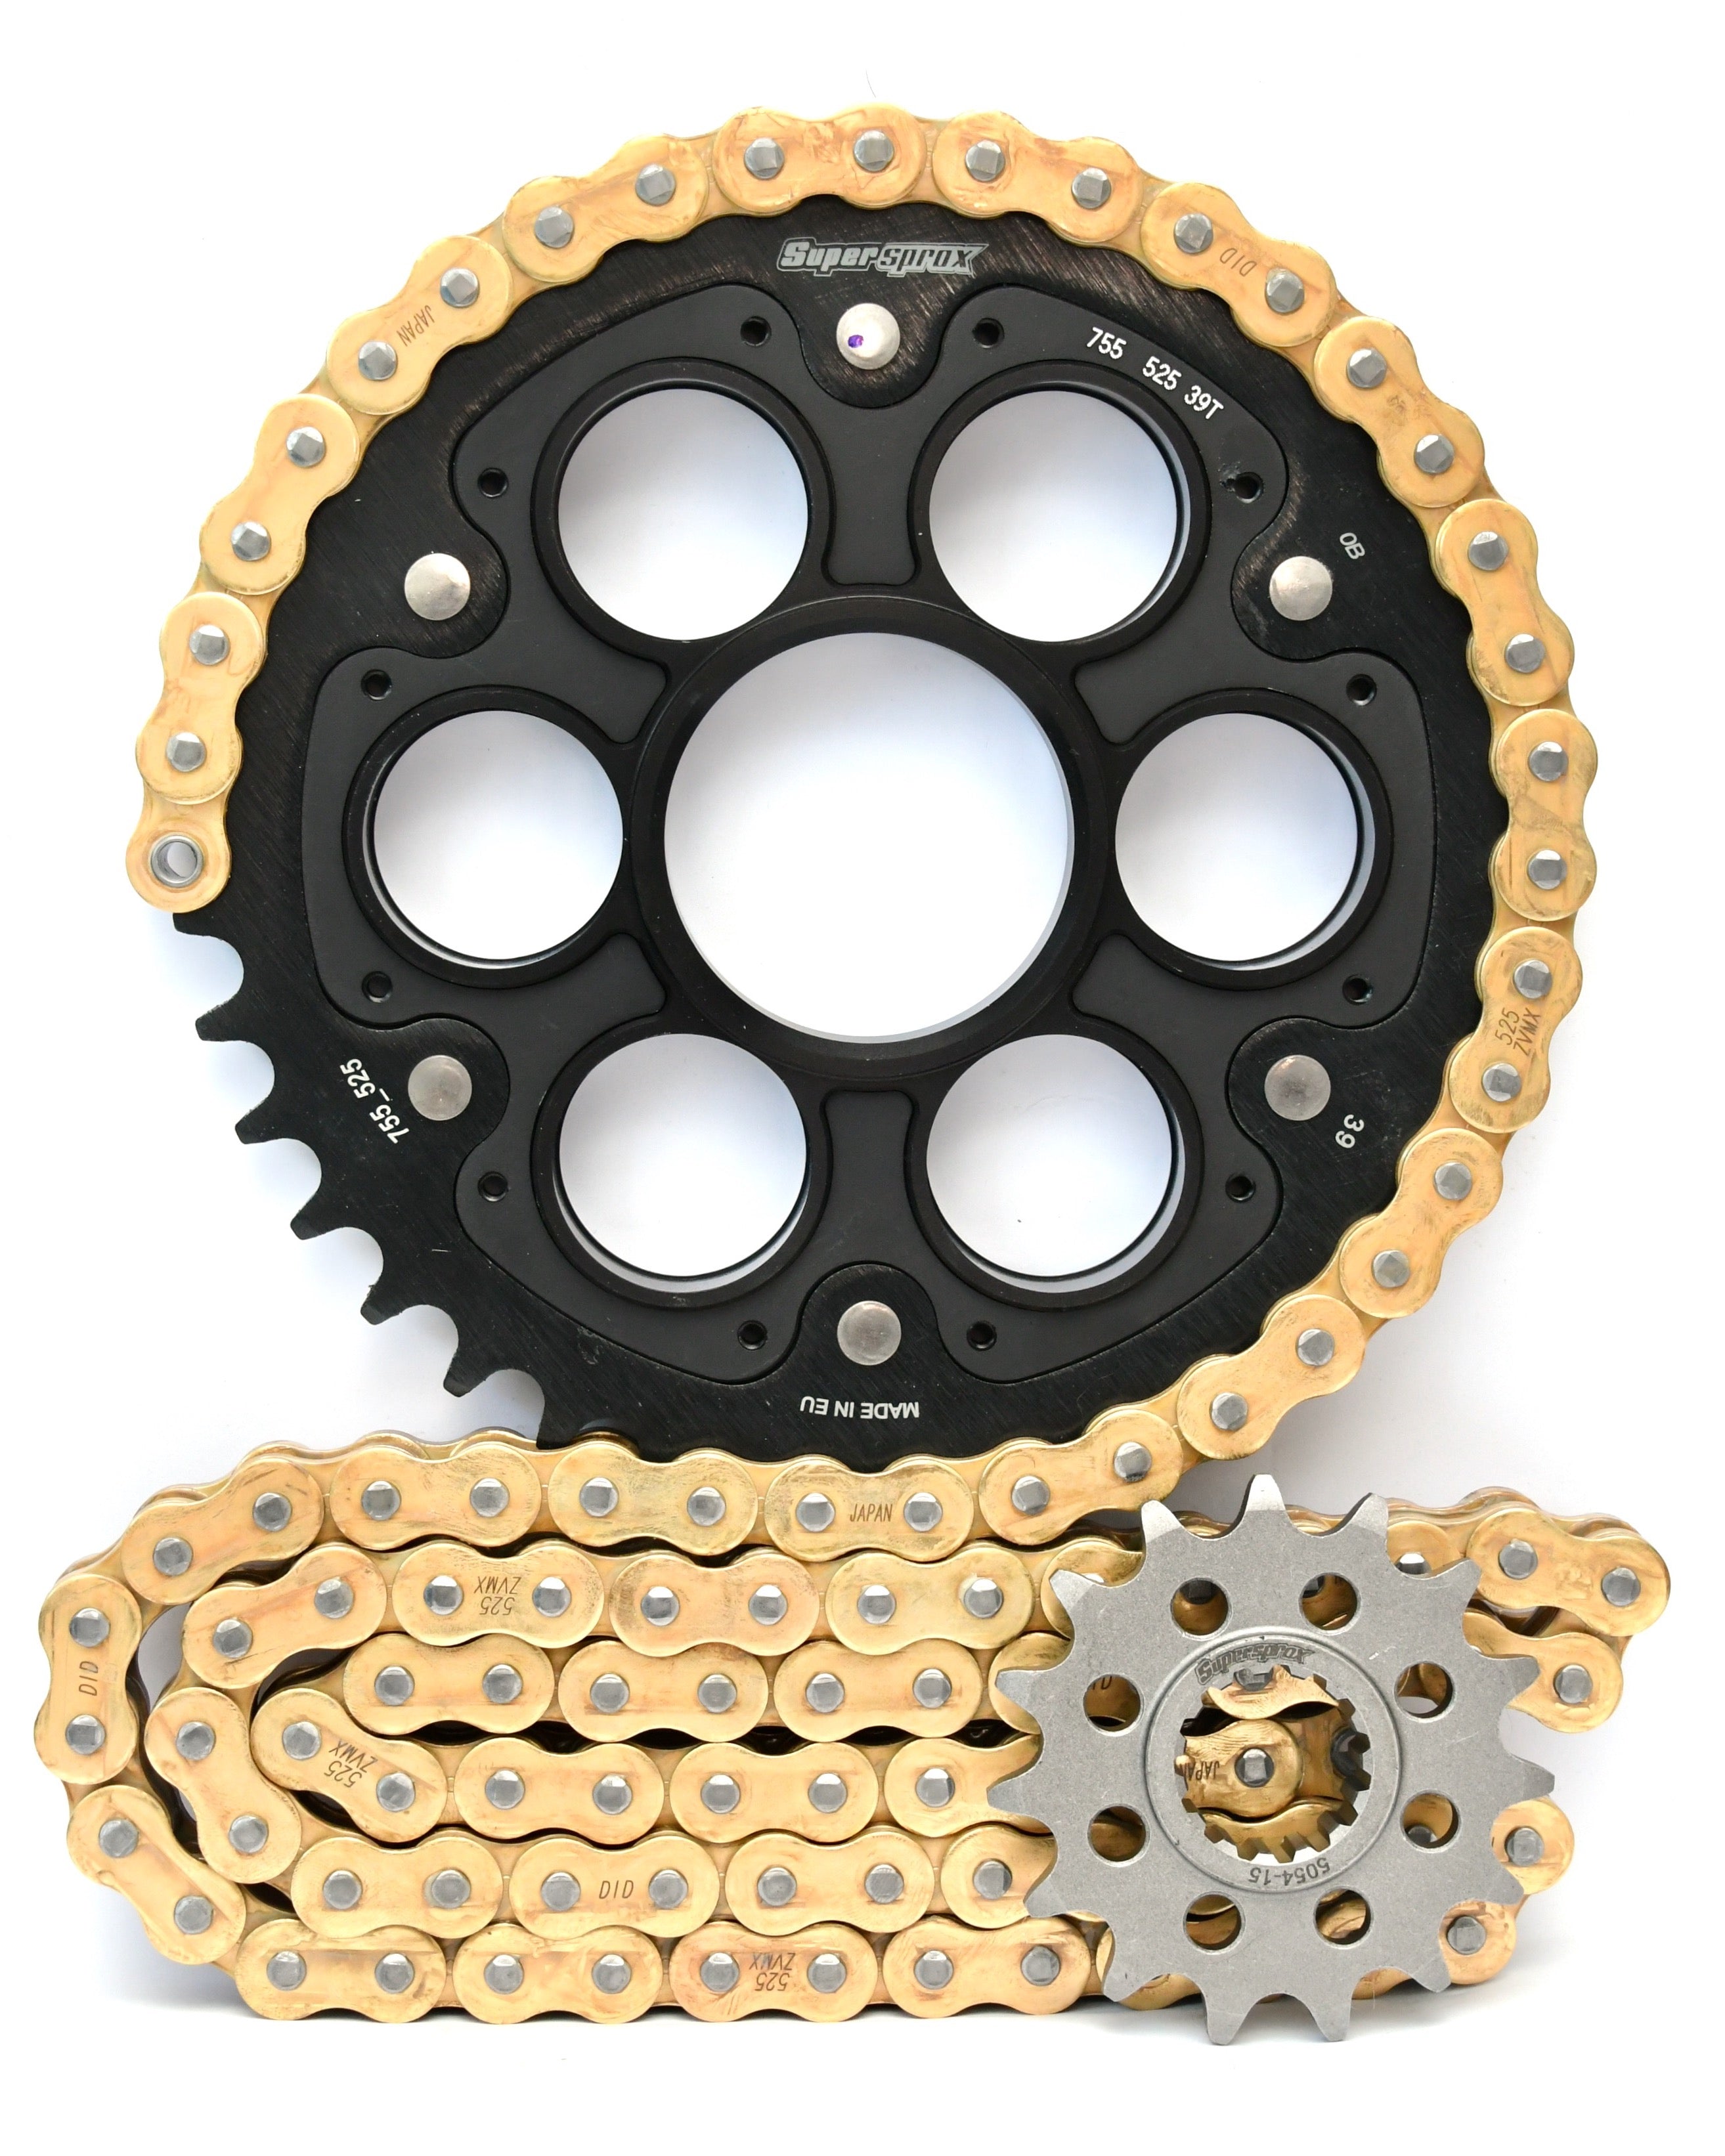 Supersprox Chain & Sprocket Kit for Ducati Panigale - Choose Your Gearing